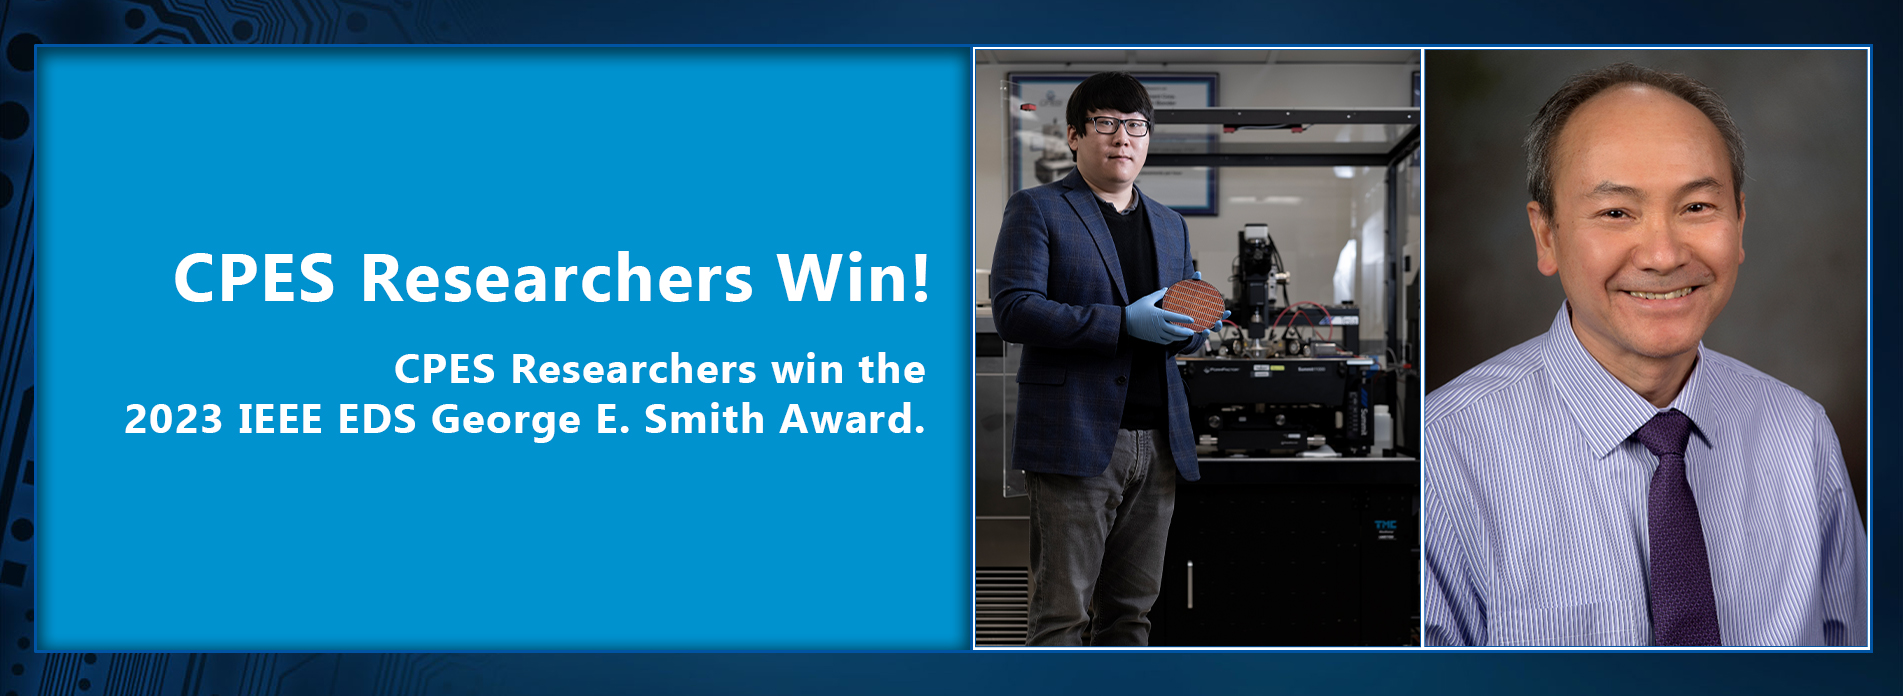 CPES Researchers Win